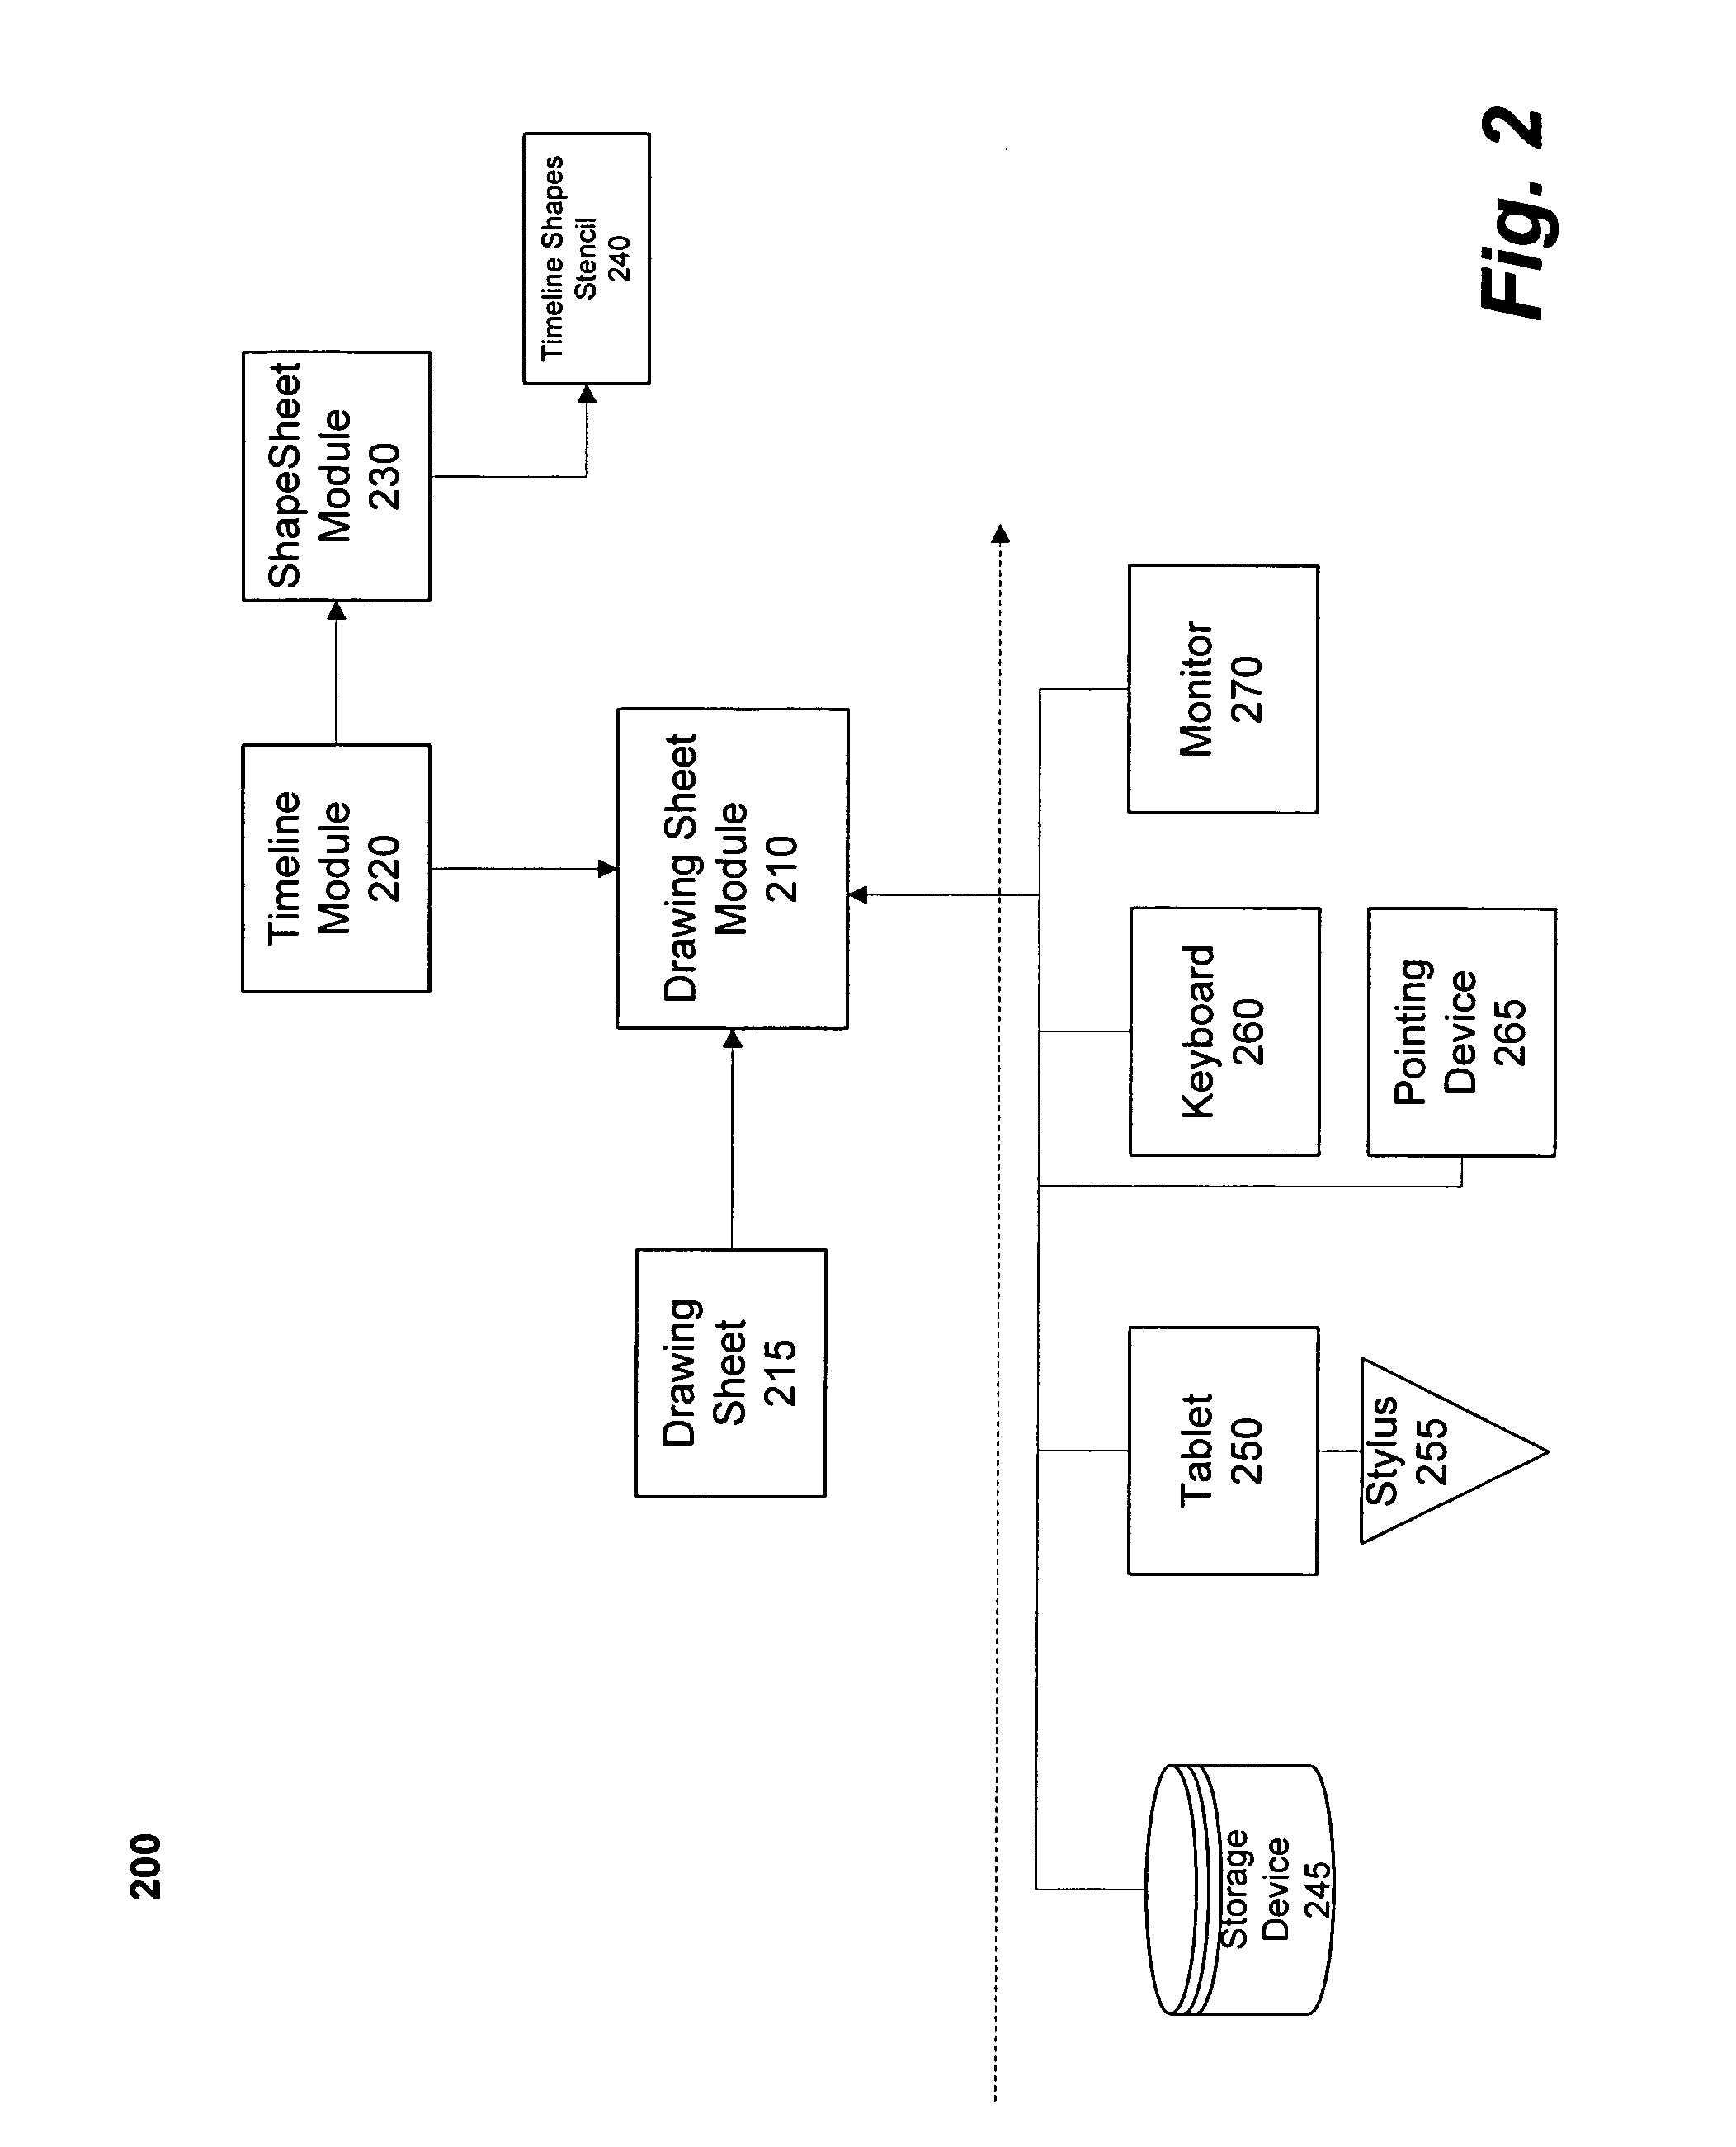 System and method for providing a dynamic expanded timeline